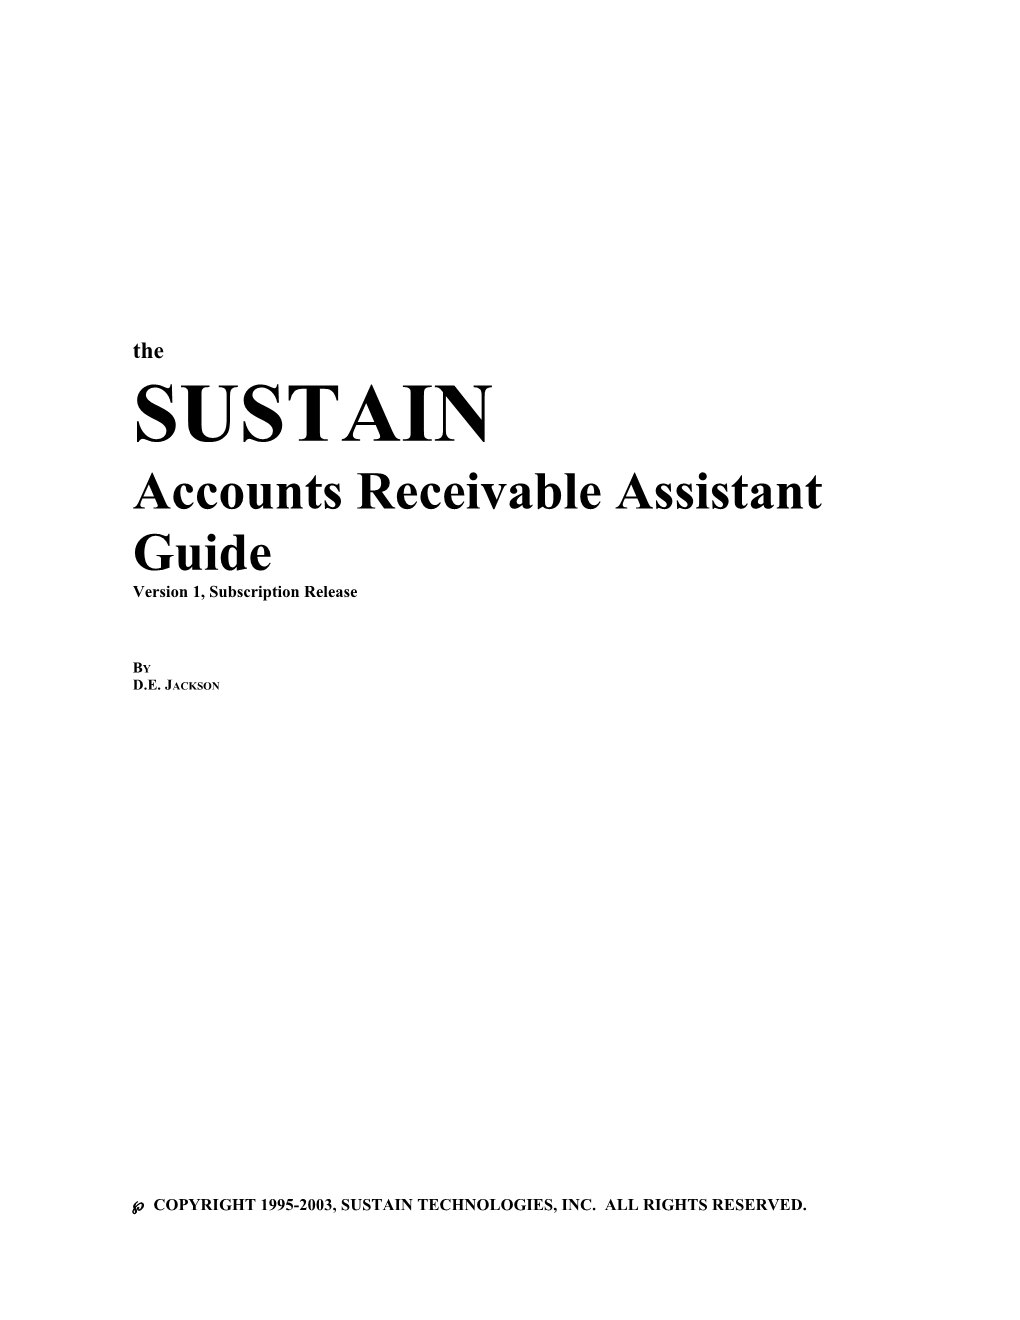 The SUSTAIN Accounts Receivable Assistant Guide